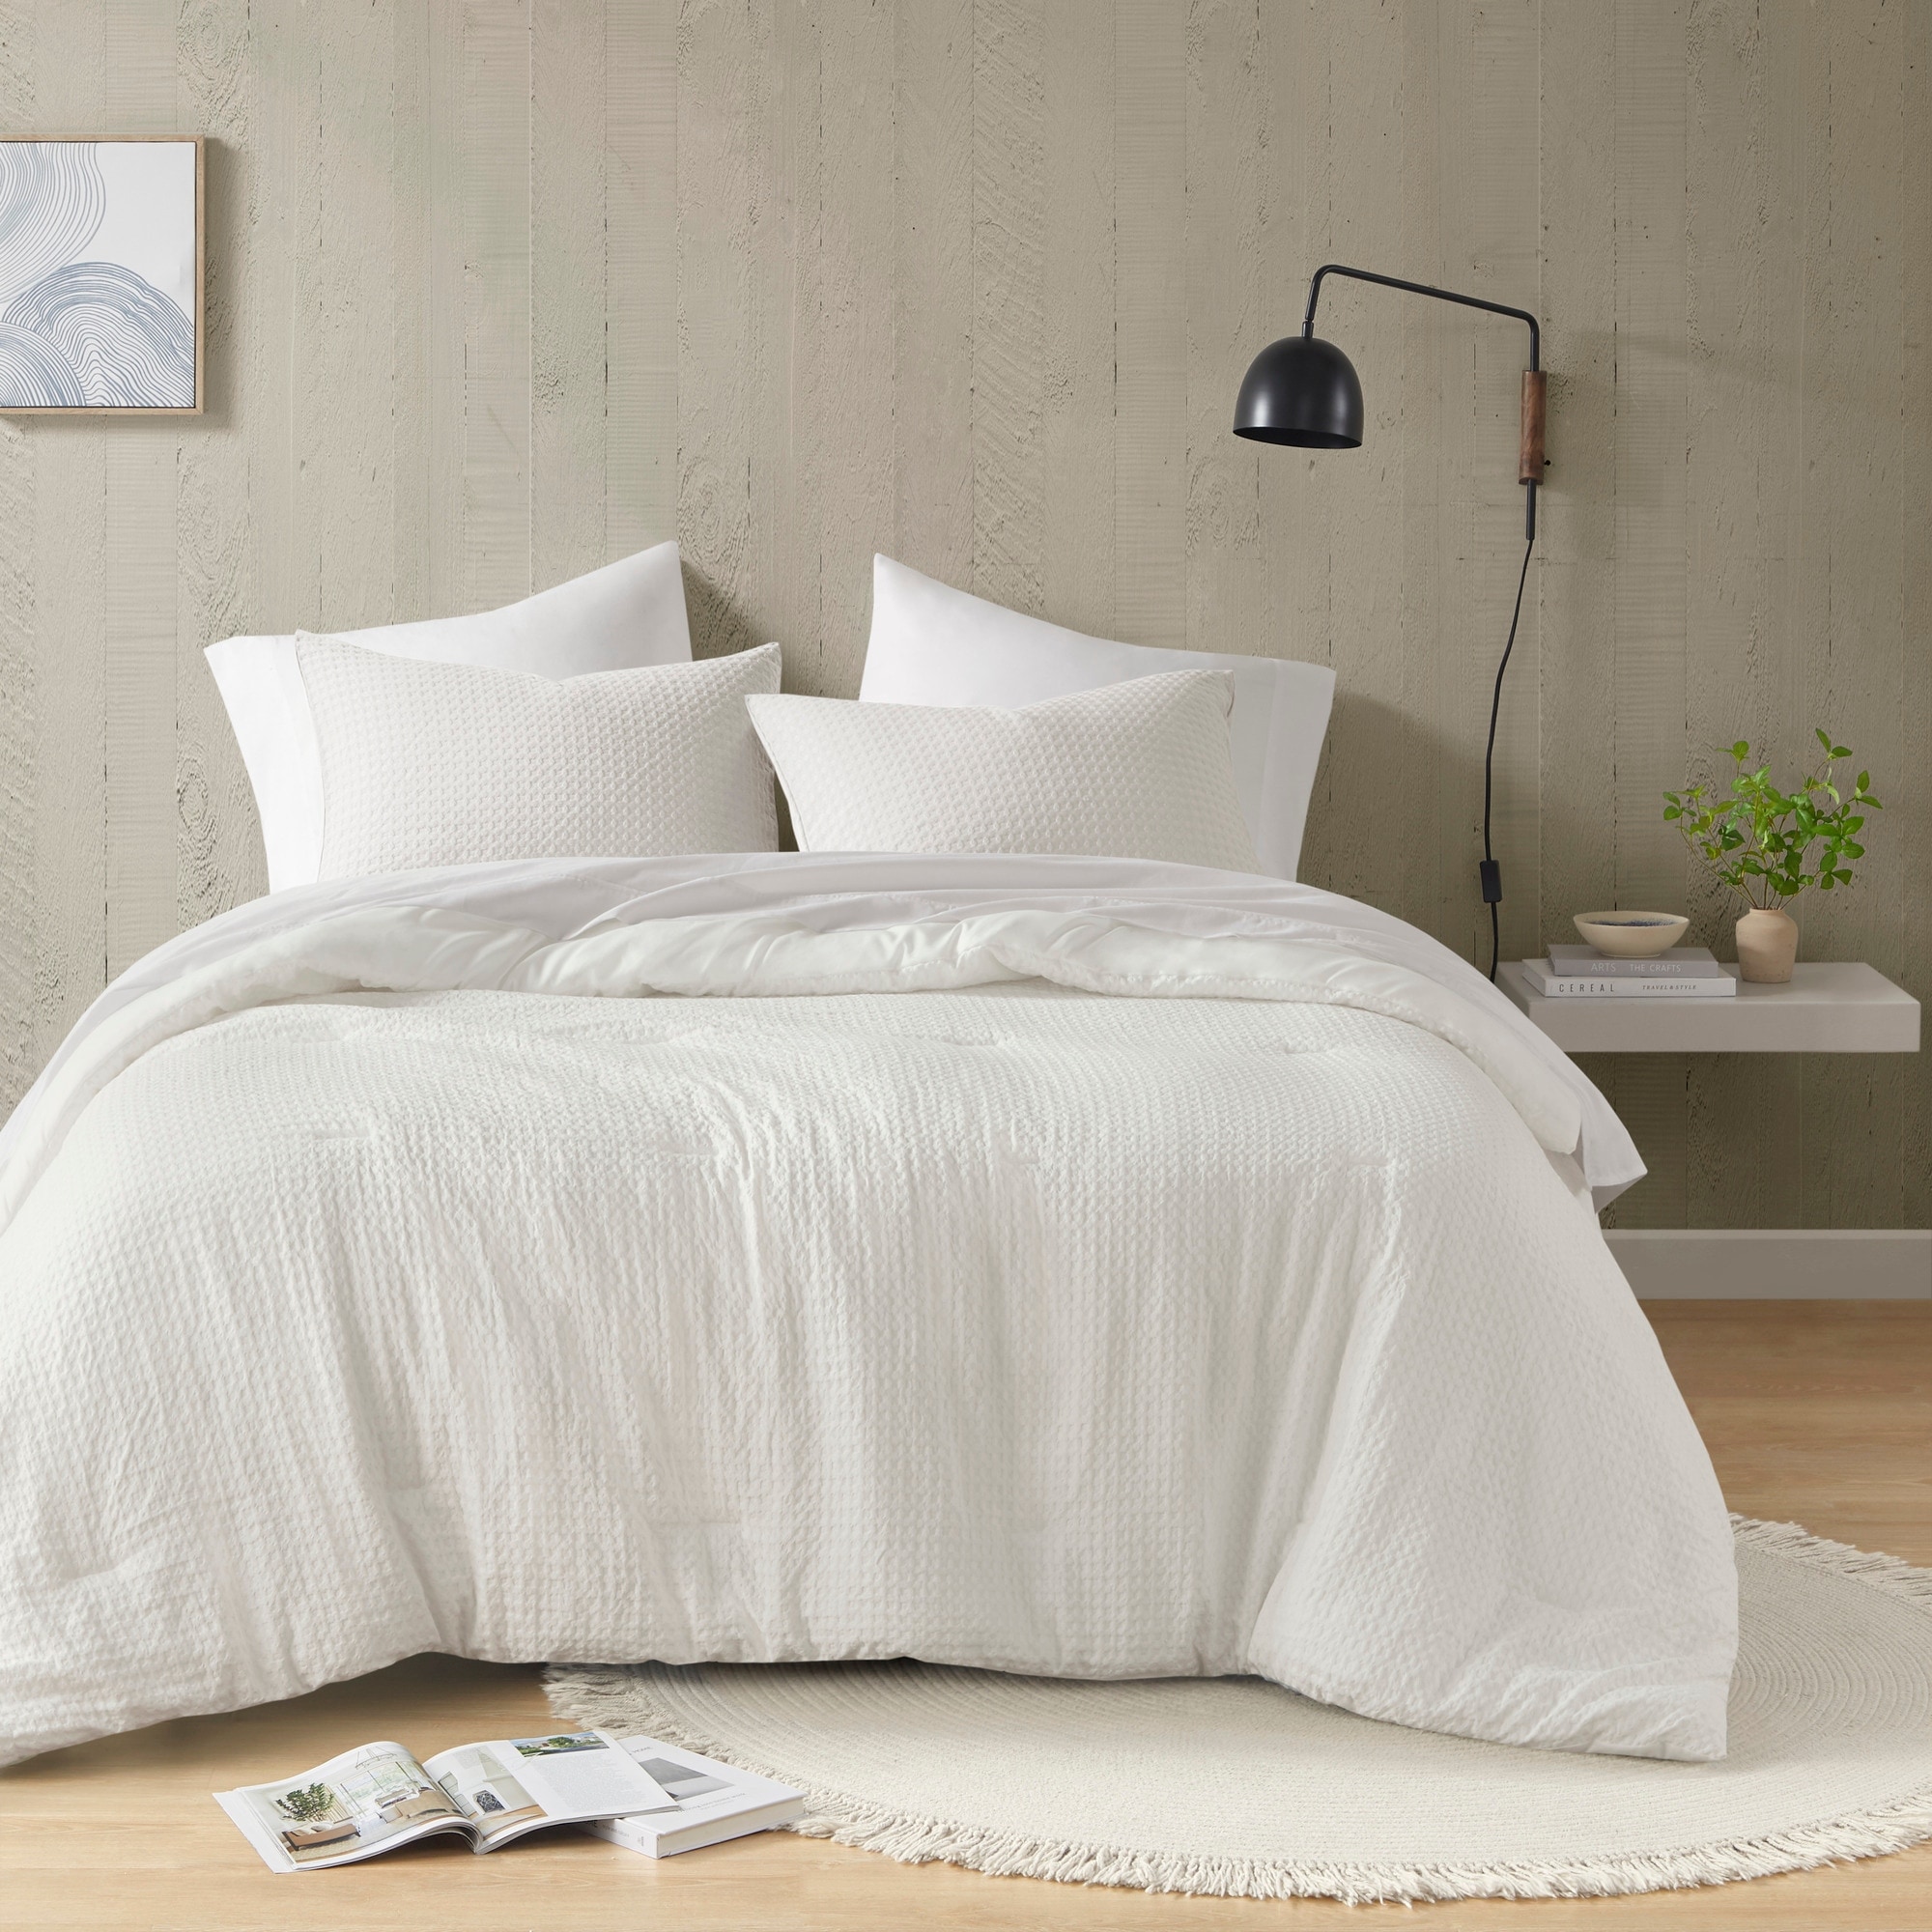 Textured Comforters and Sets - Bed Bath & Beyond